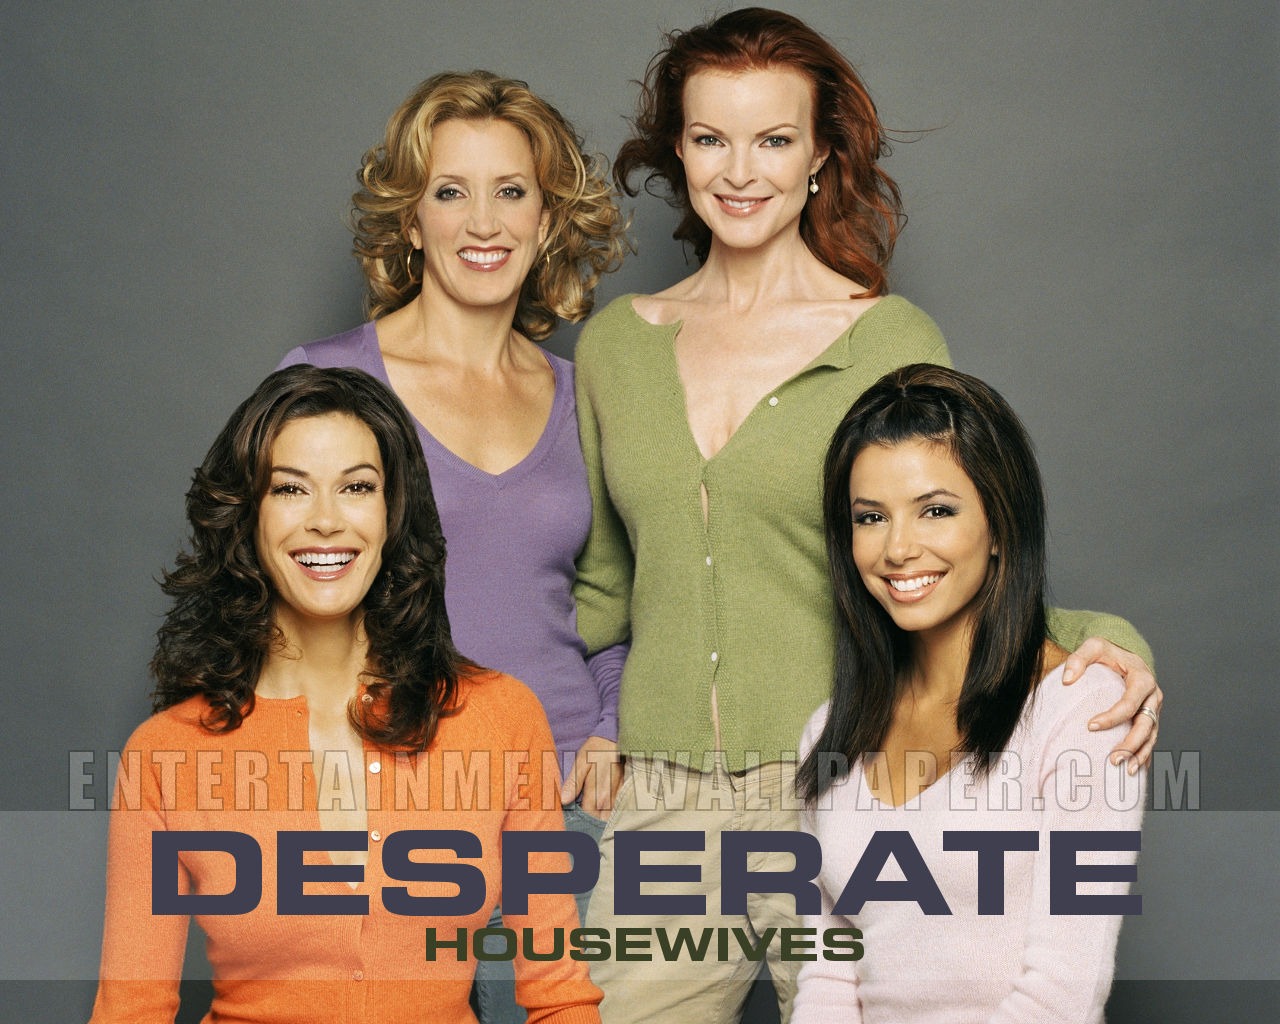 Desperate Housewives 絕望的主婦 #47 - 1280x1024